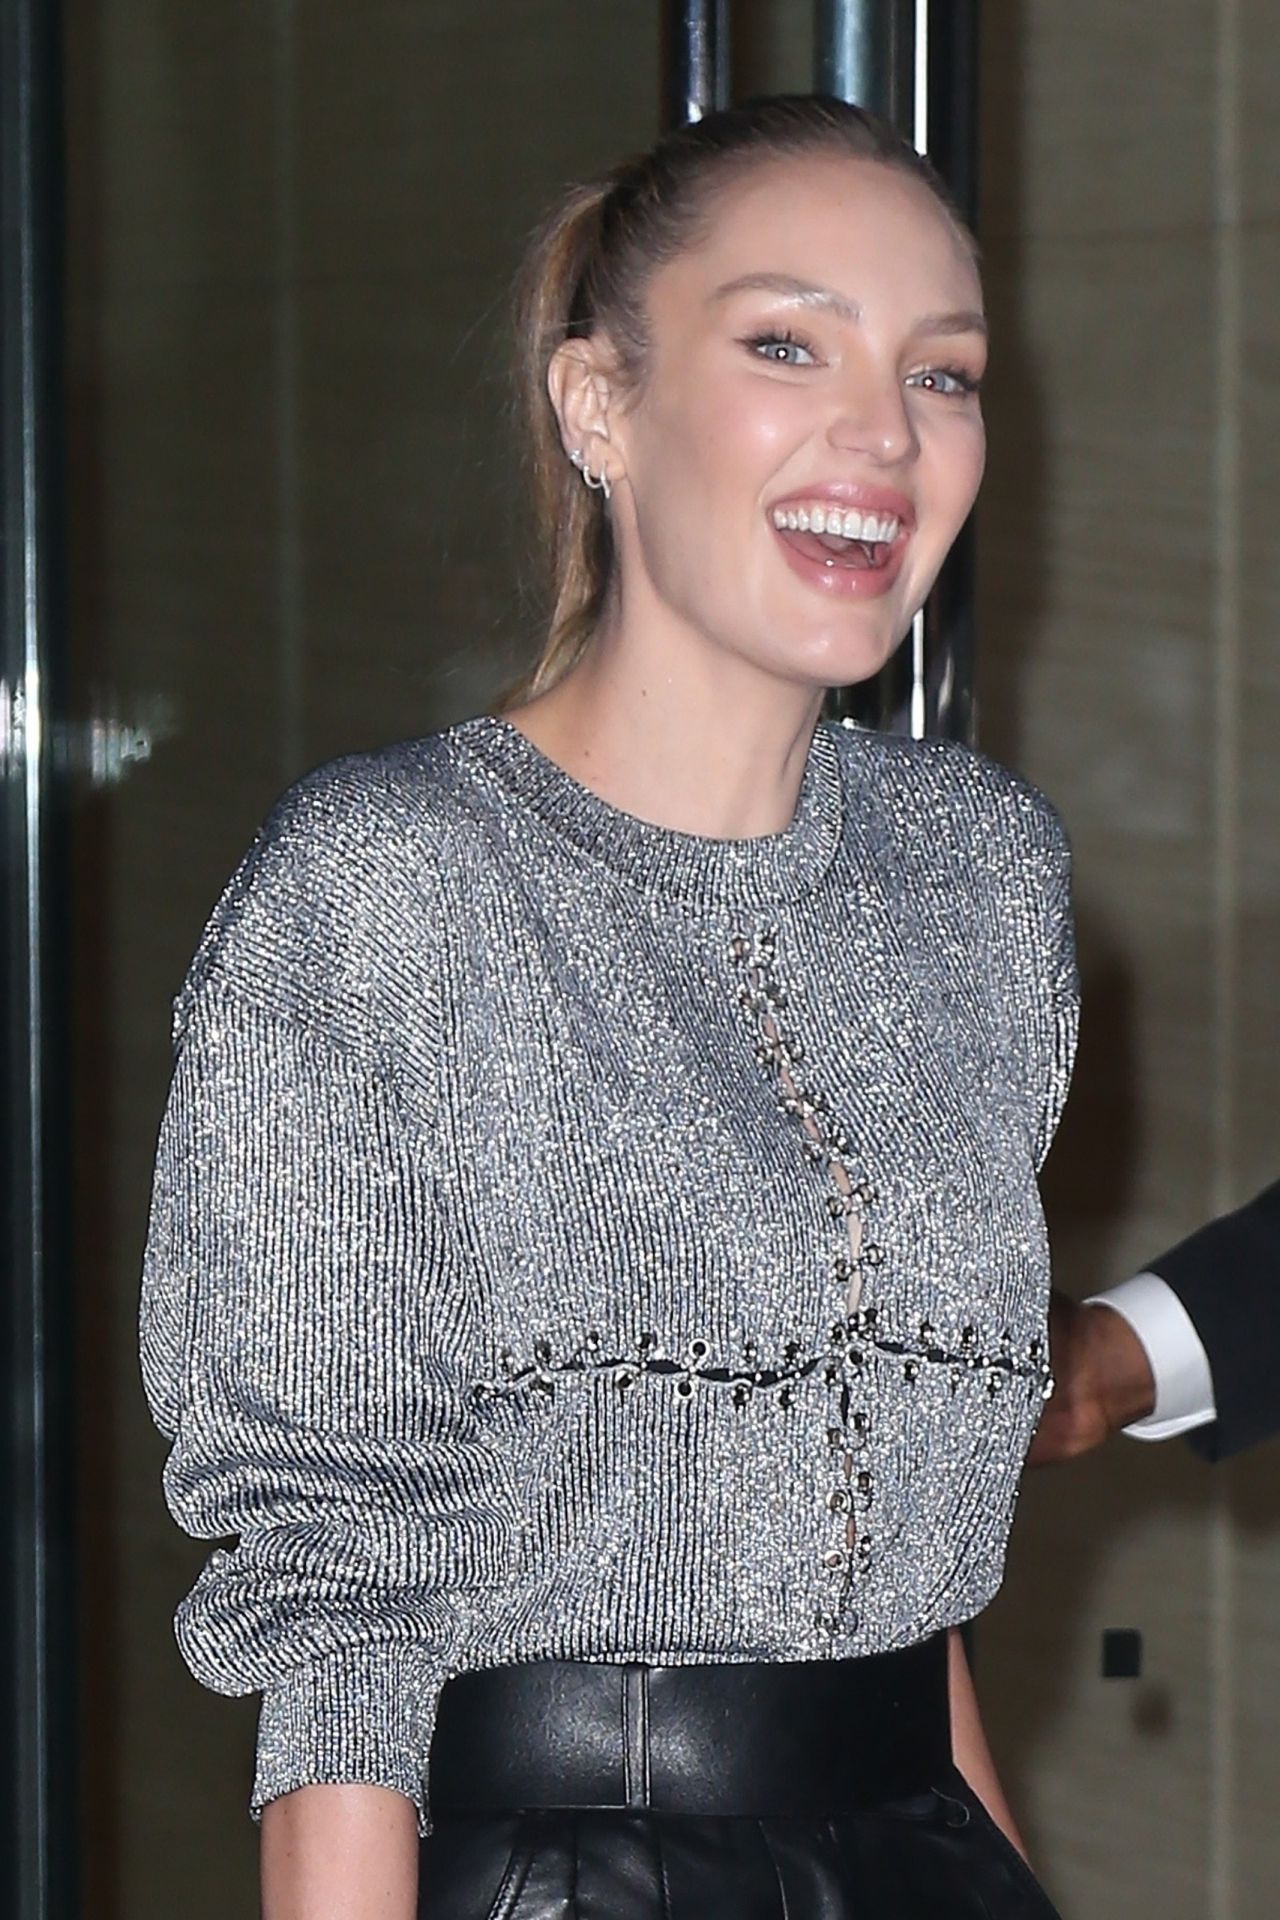 candice-swanepoel-at-the-victoria-s-secret-offices-in-nyc-10-30-2018-3.jpg